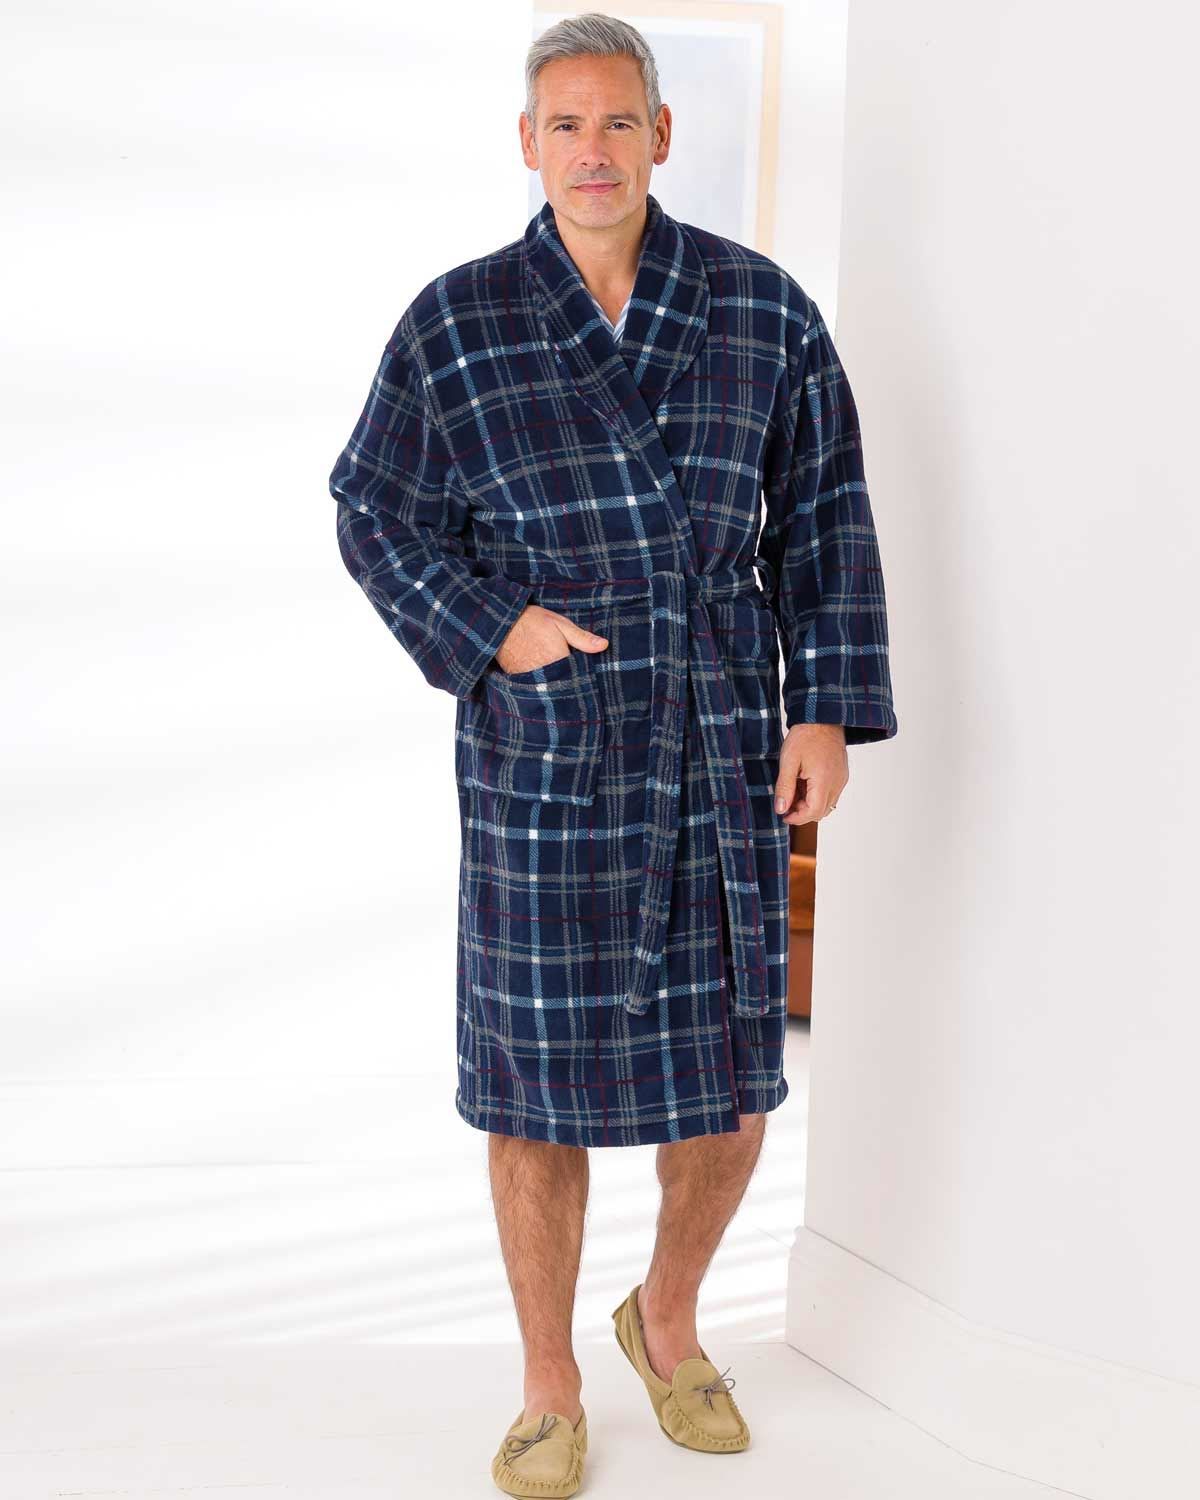 Men’s Navy Check Fleece Dressing Gown from Country Collection.